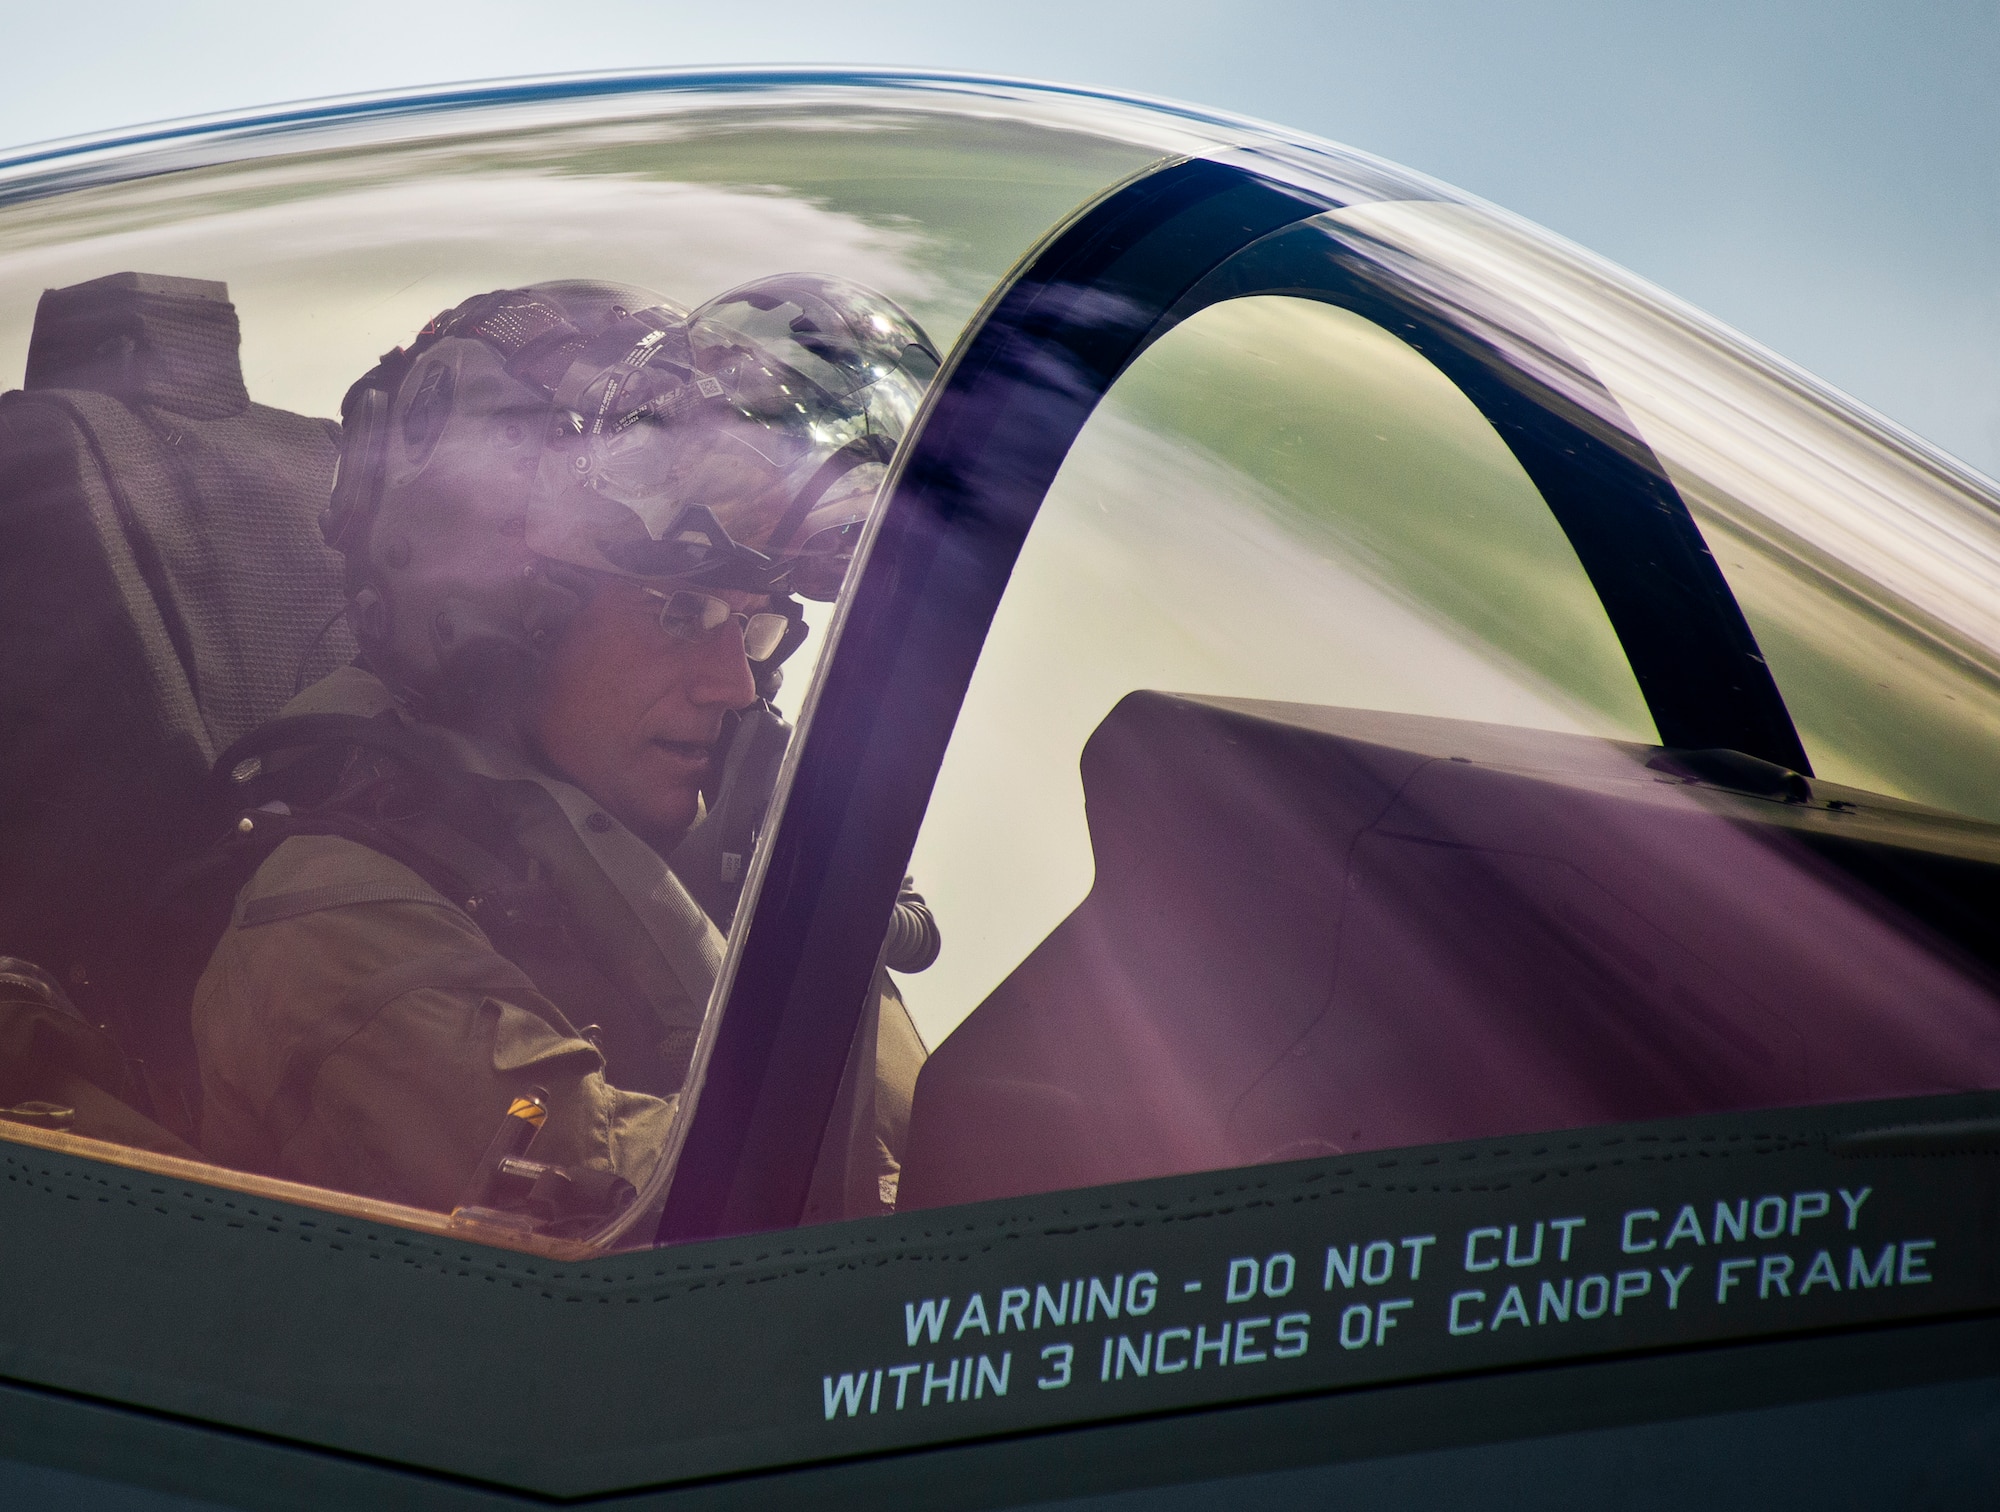 Maj. Gen. Jay Silveria, U. S. Air Force Warfare Center commander, takes a break in his F-35A Lightning II while the aircraft is refueling during his final qualifying flight Sept. 26 at Eglin Air Force Base, Fla.  Silveria became the first general officer in the Department of Defense to qualify in the fifth generation fighter.  He completed his training with back-to-back flights and hot pit refueling.  (U.S. Air Force photo/Samuel King Jr.)